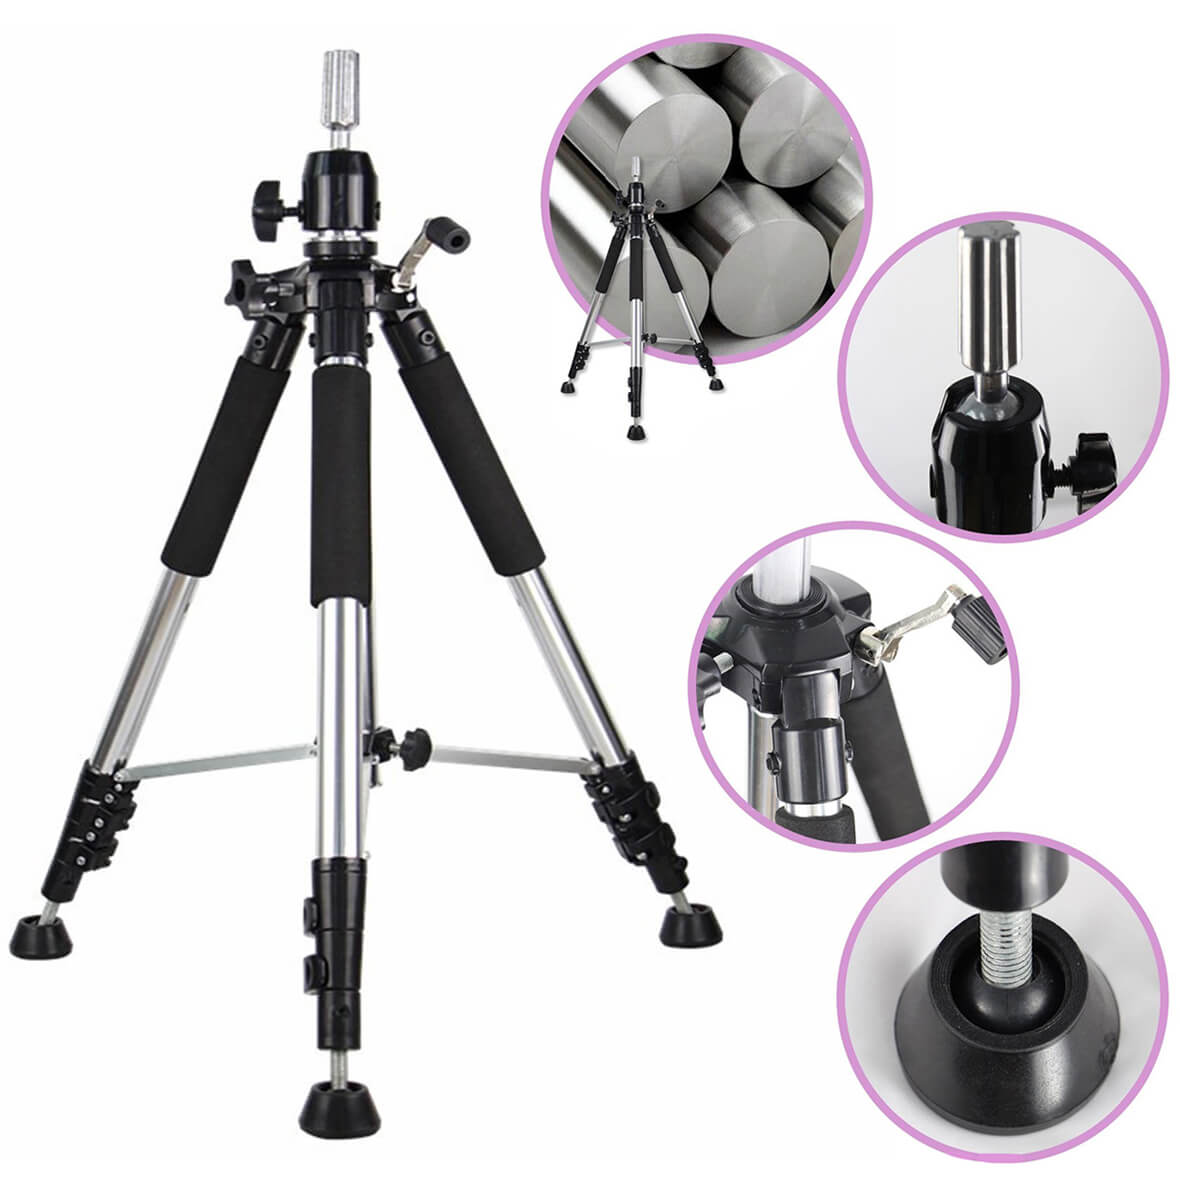 55Inch Wig Stand Tripod Mannequin Head Stand Adjustable Wig Head Stand  Holder For Styling Wig Head With Tray,Free Carrying Bag